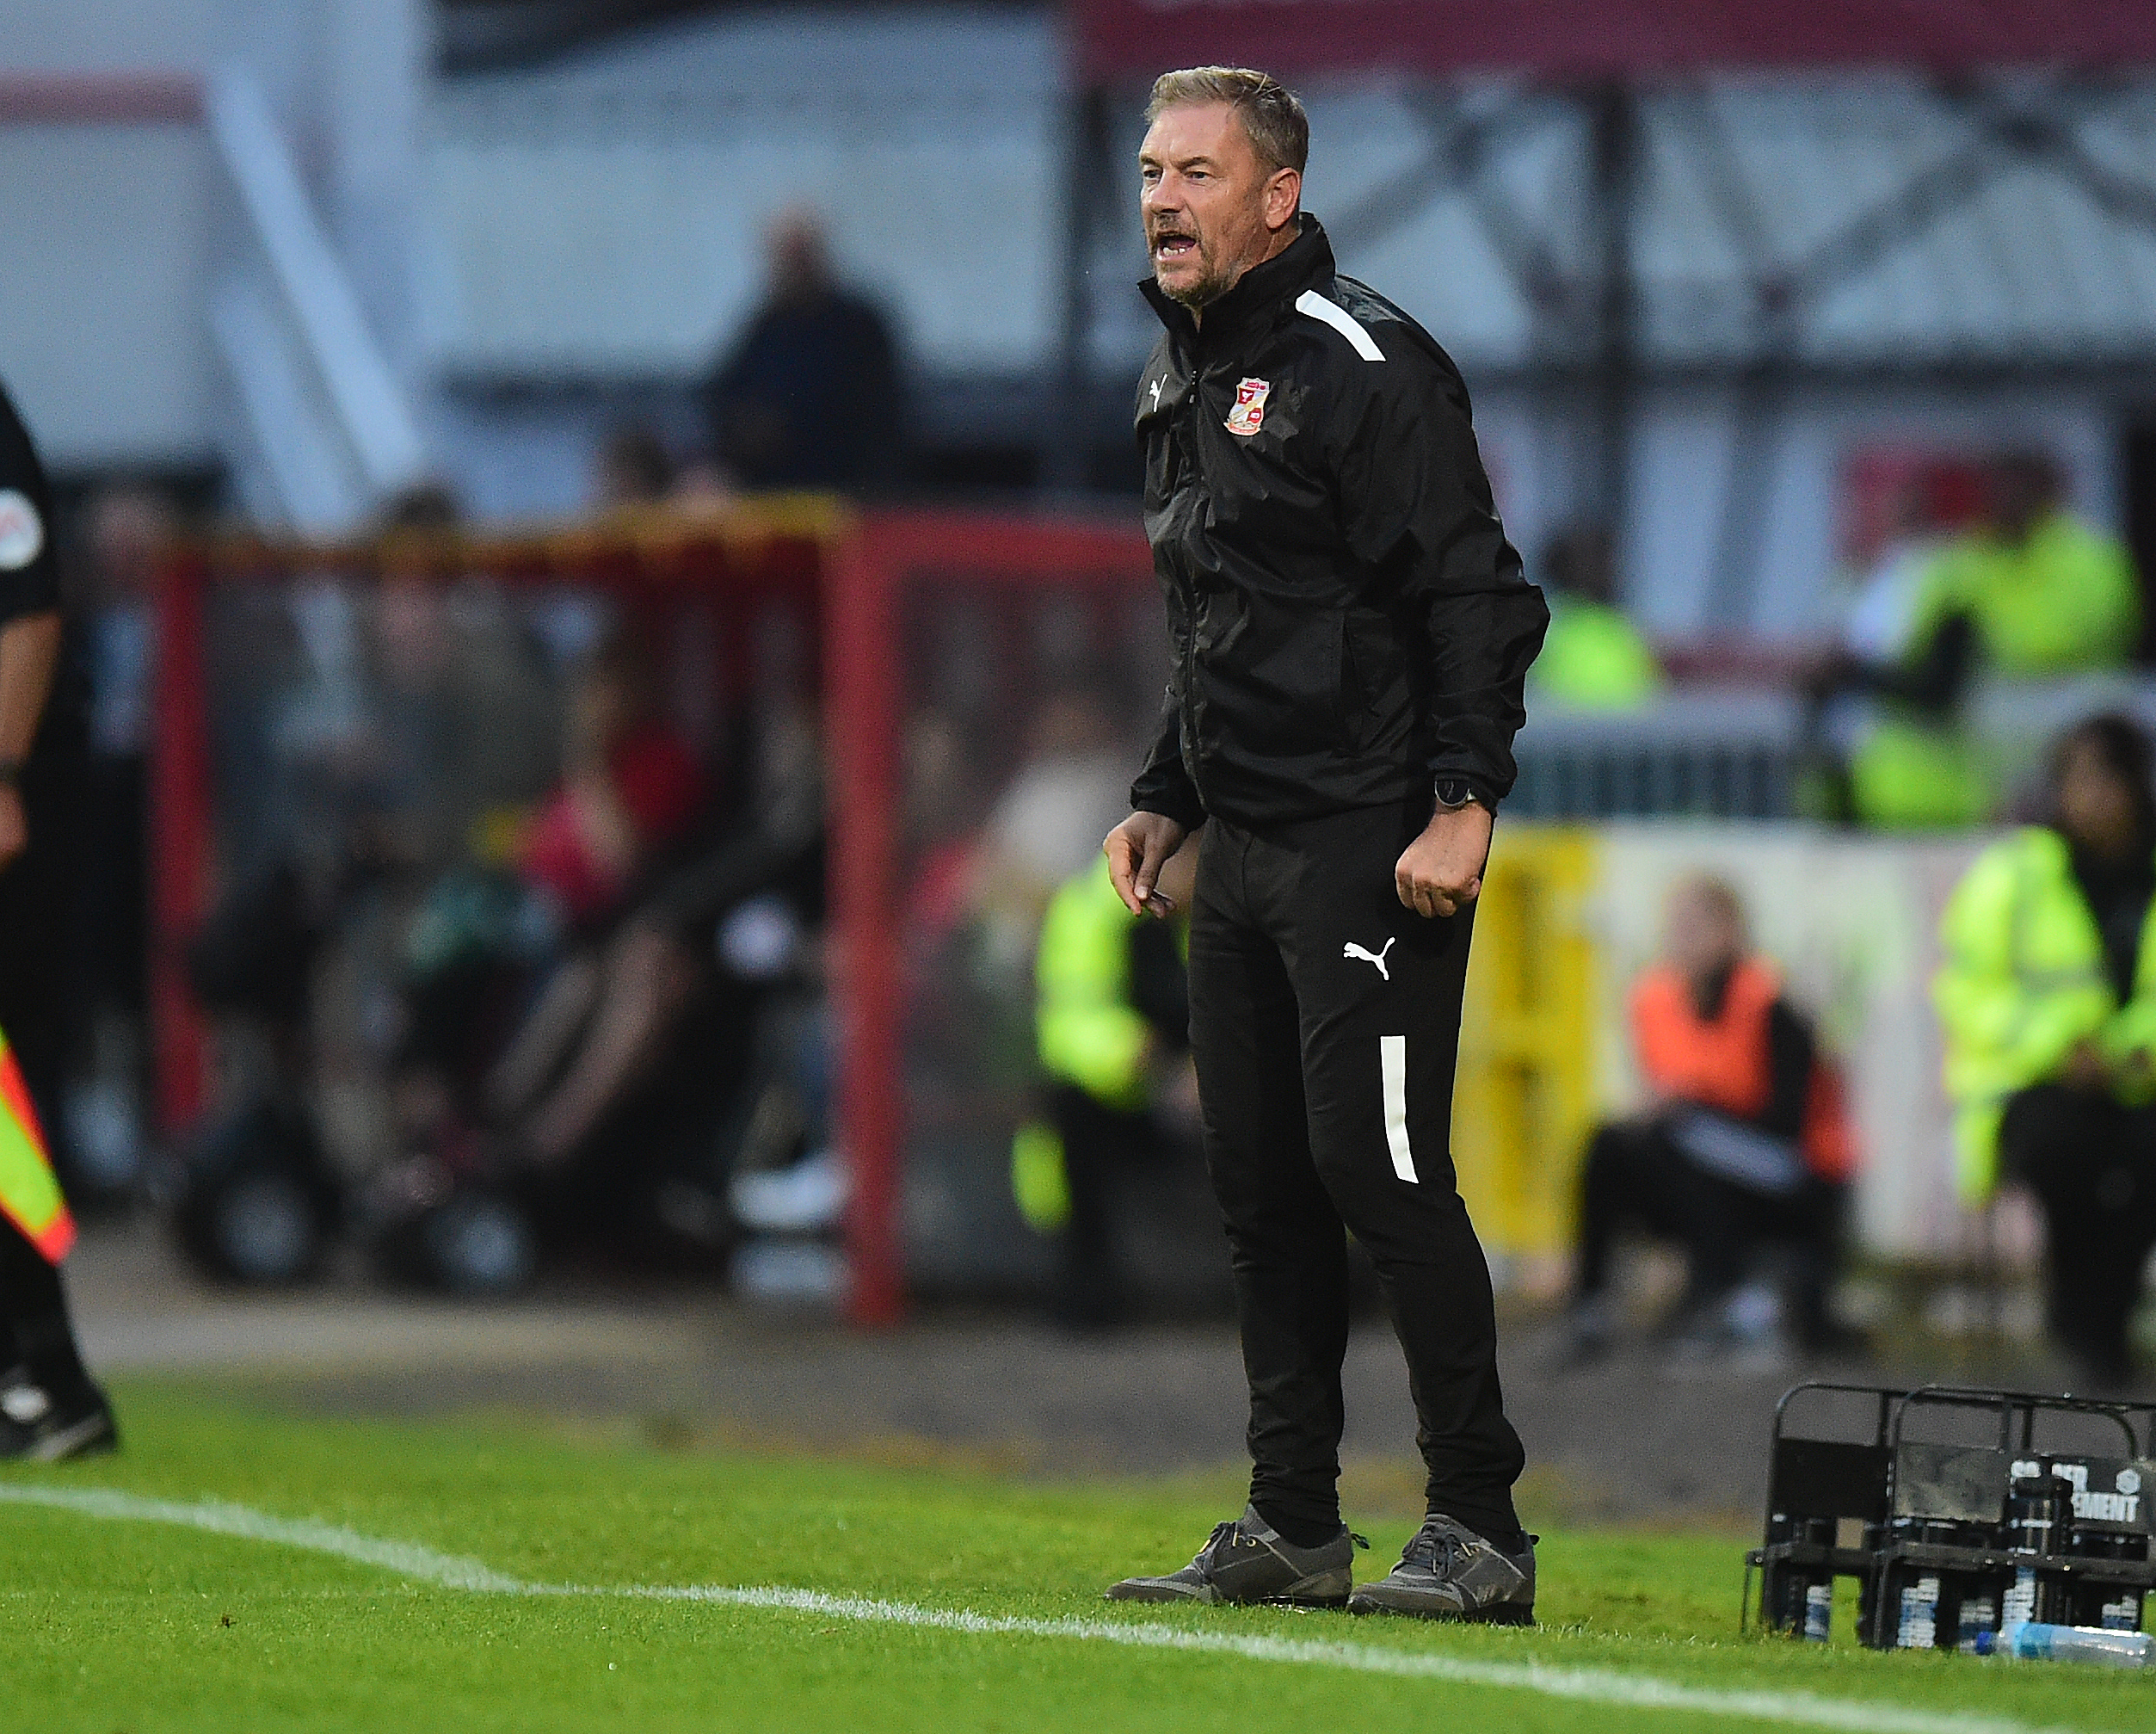 Scott Lindsey was frustrated that Swindon conceded early for the third straight game